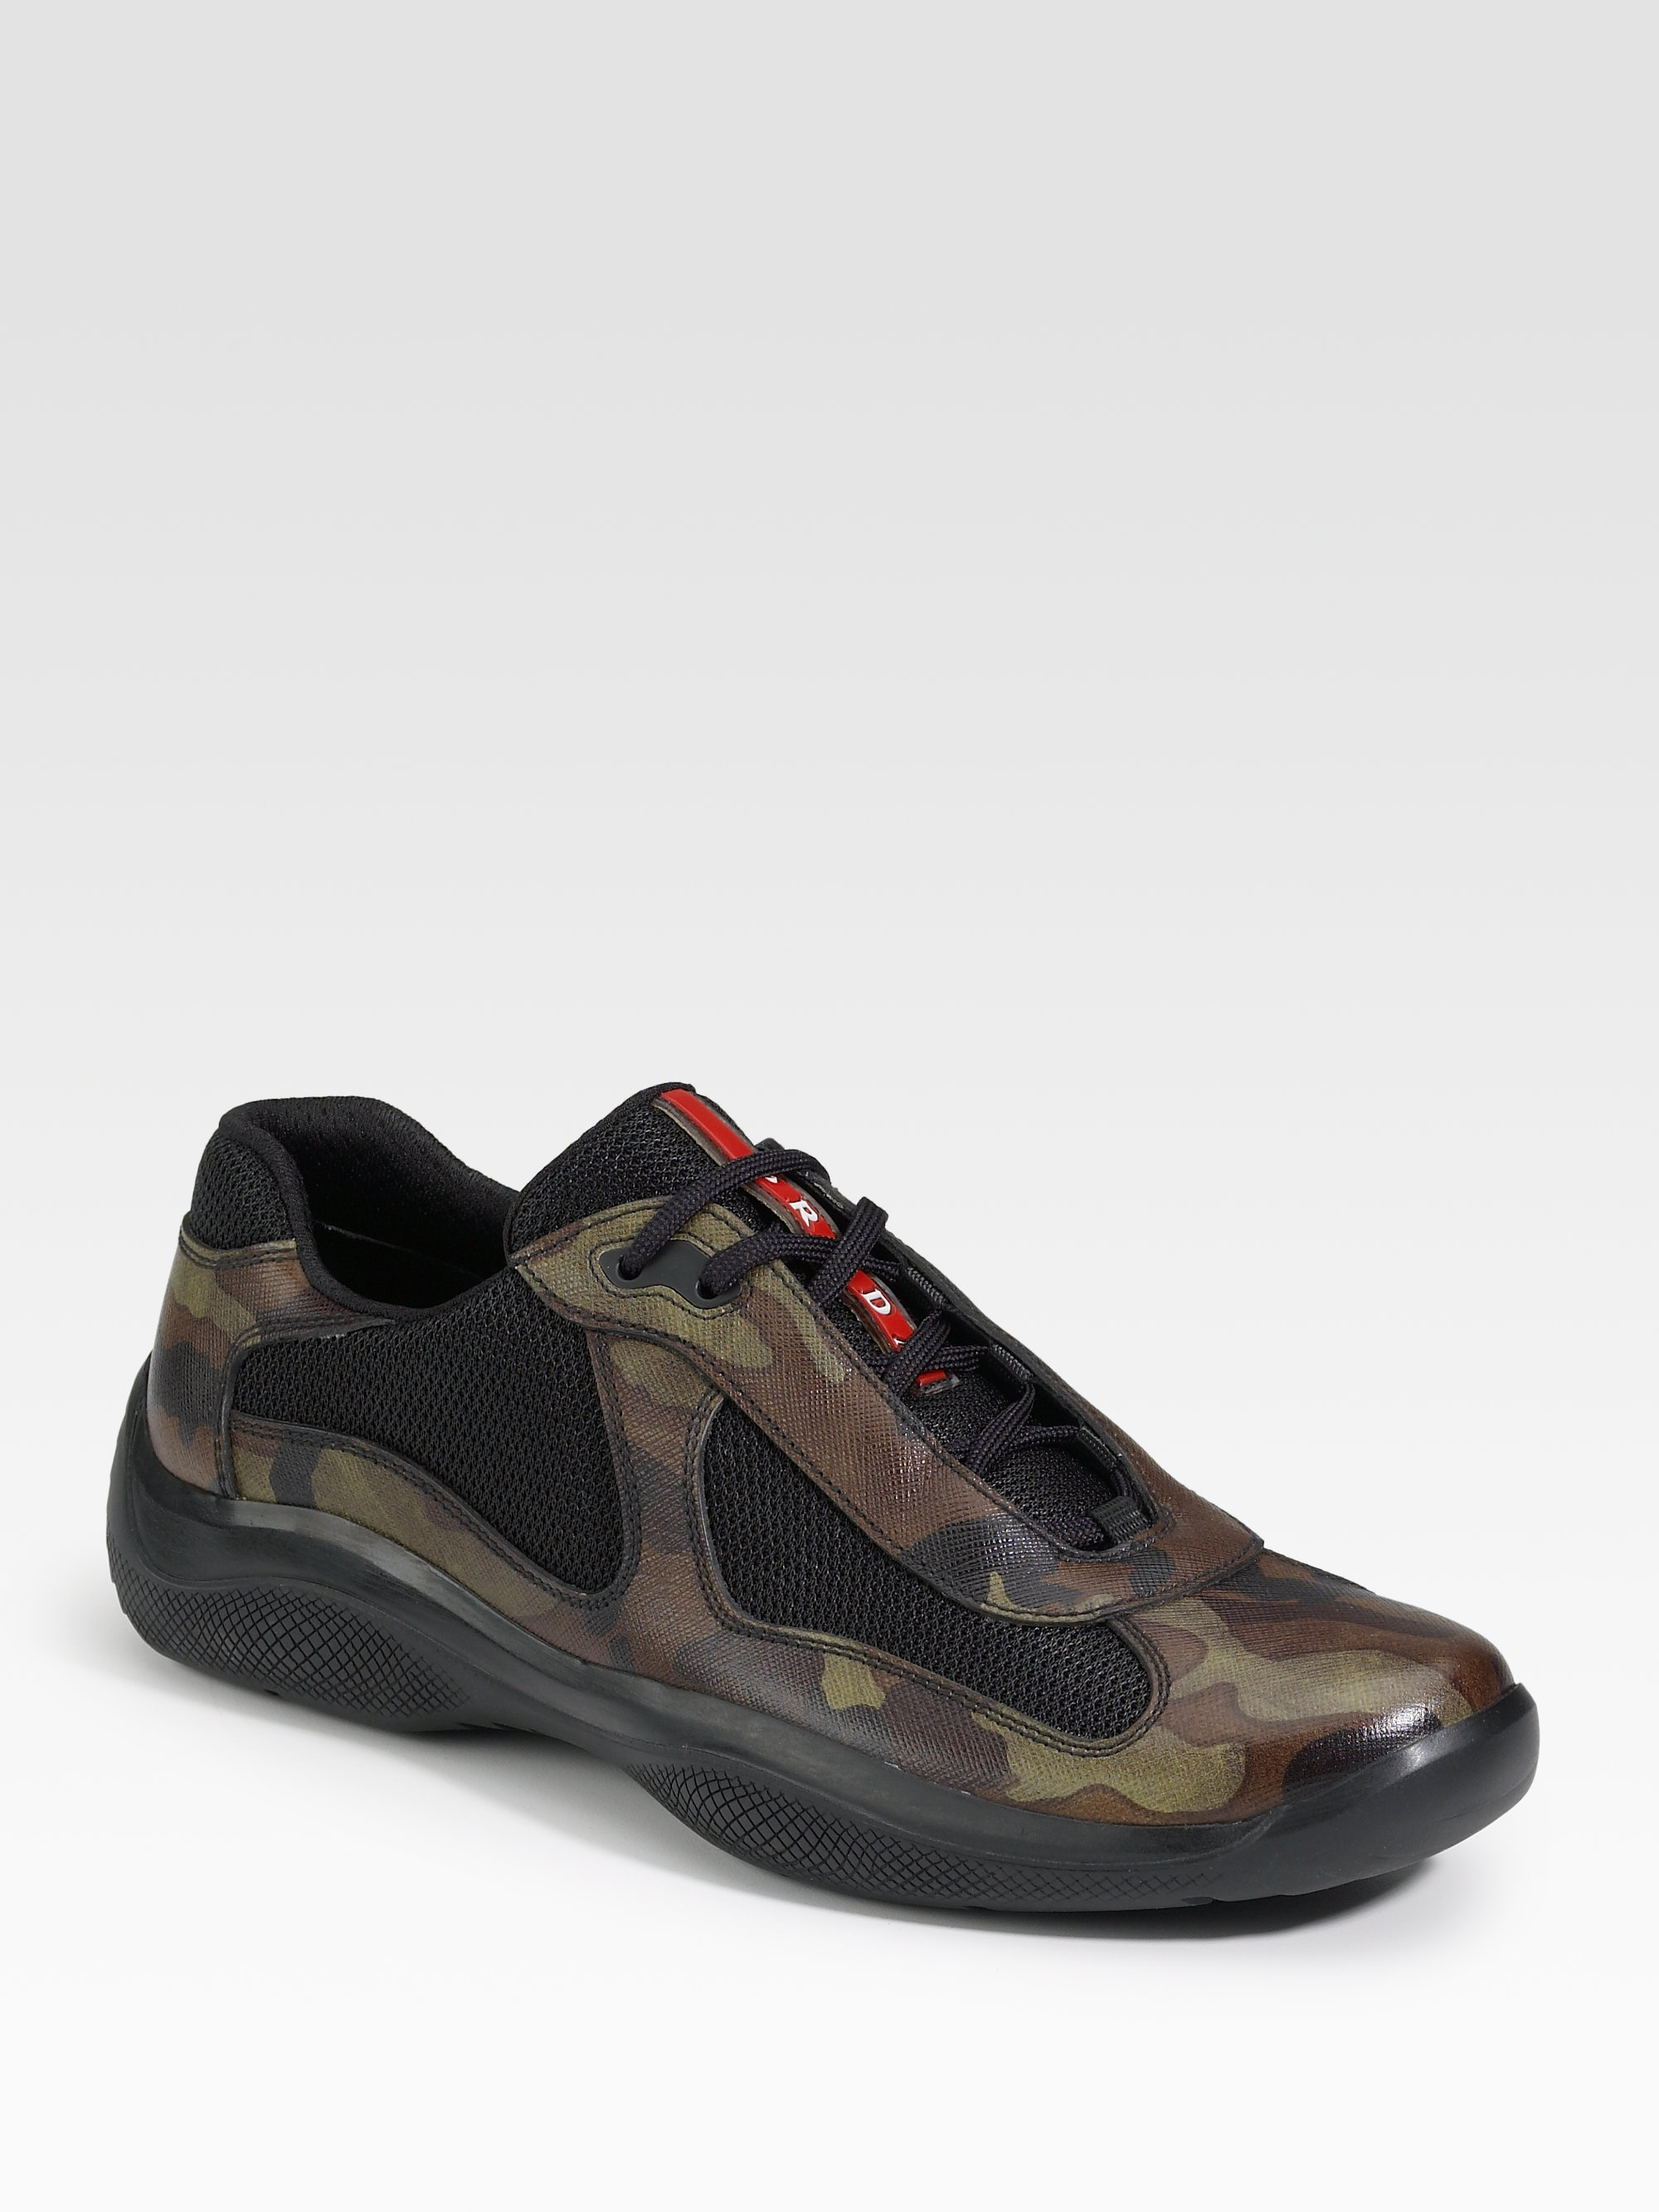 Prada Camouflage Leather Sneakers in Black for Men | Lyst